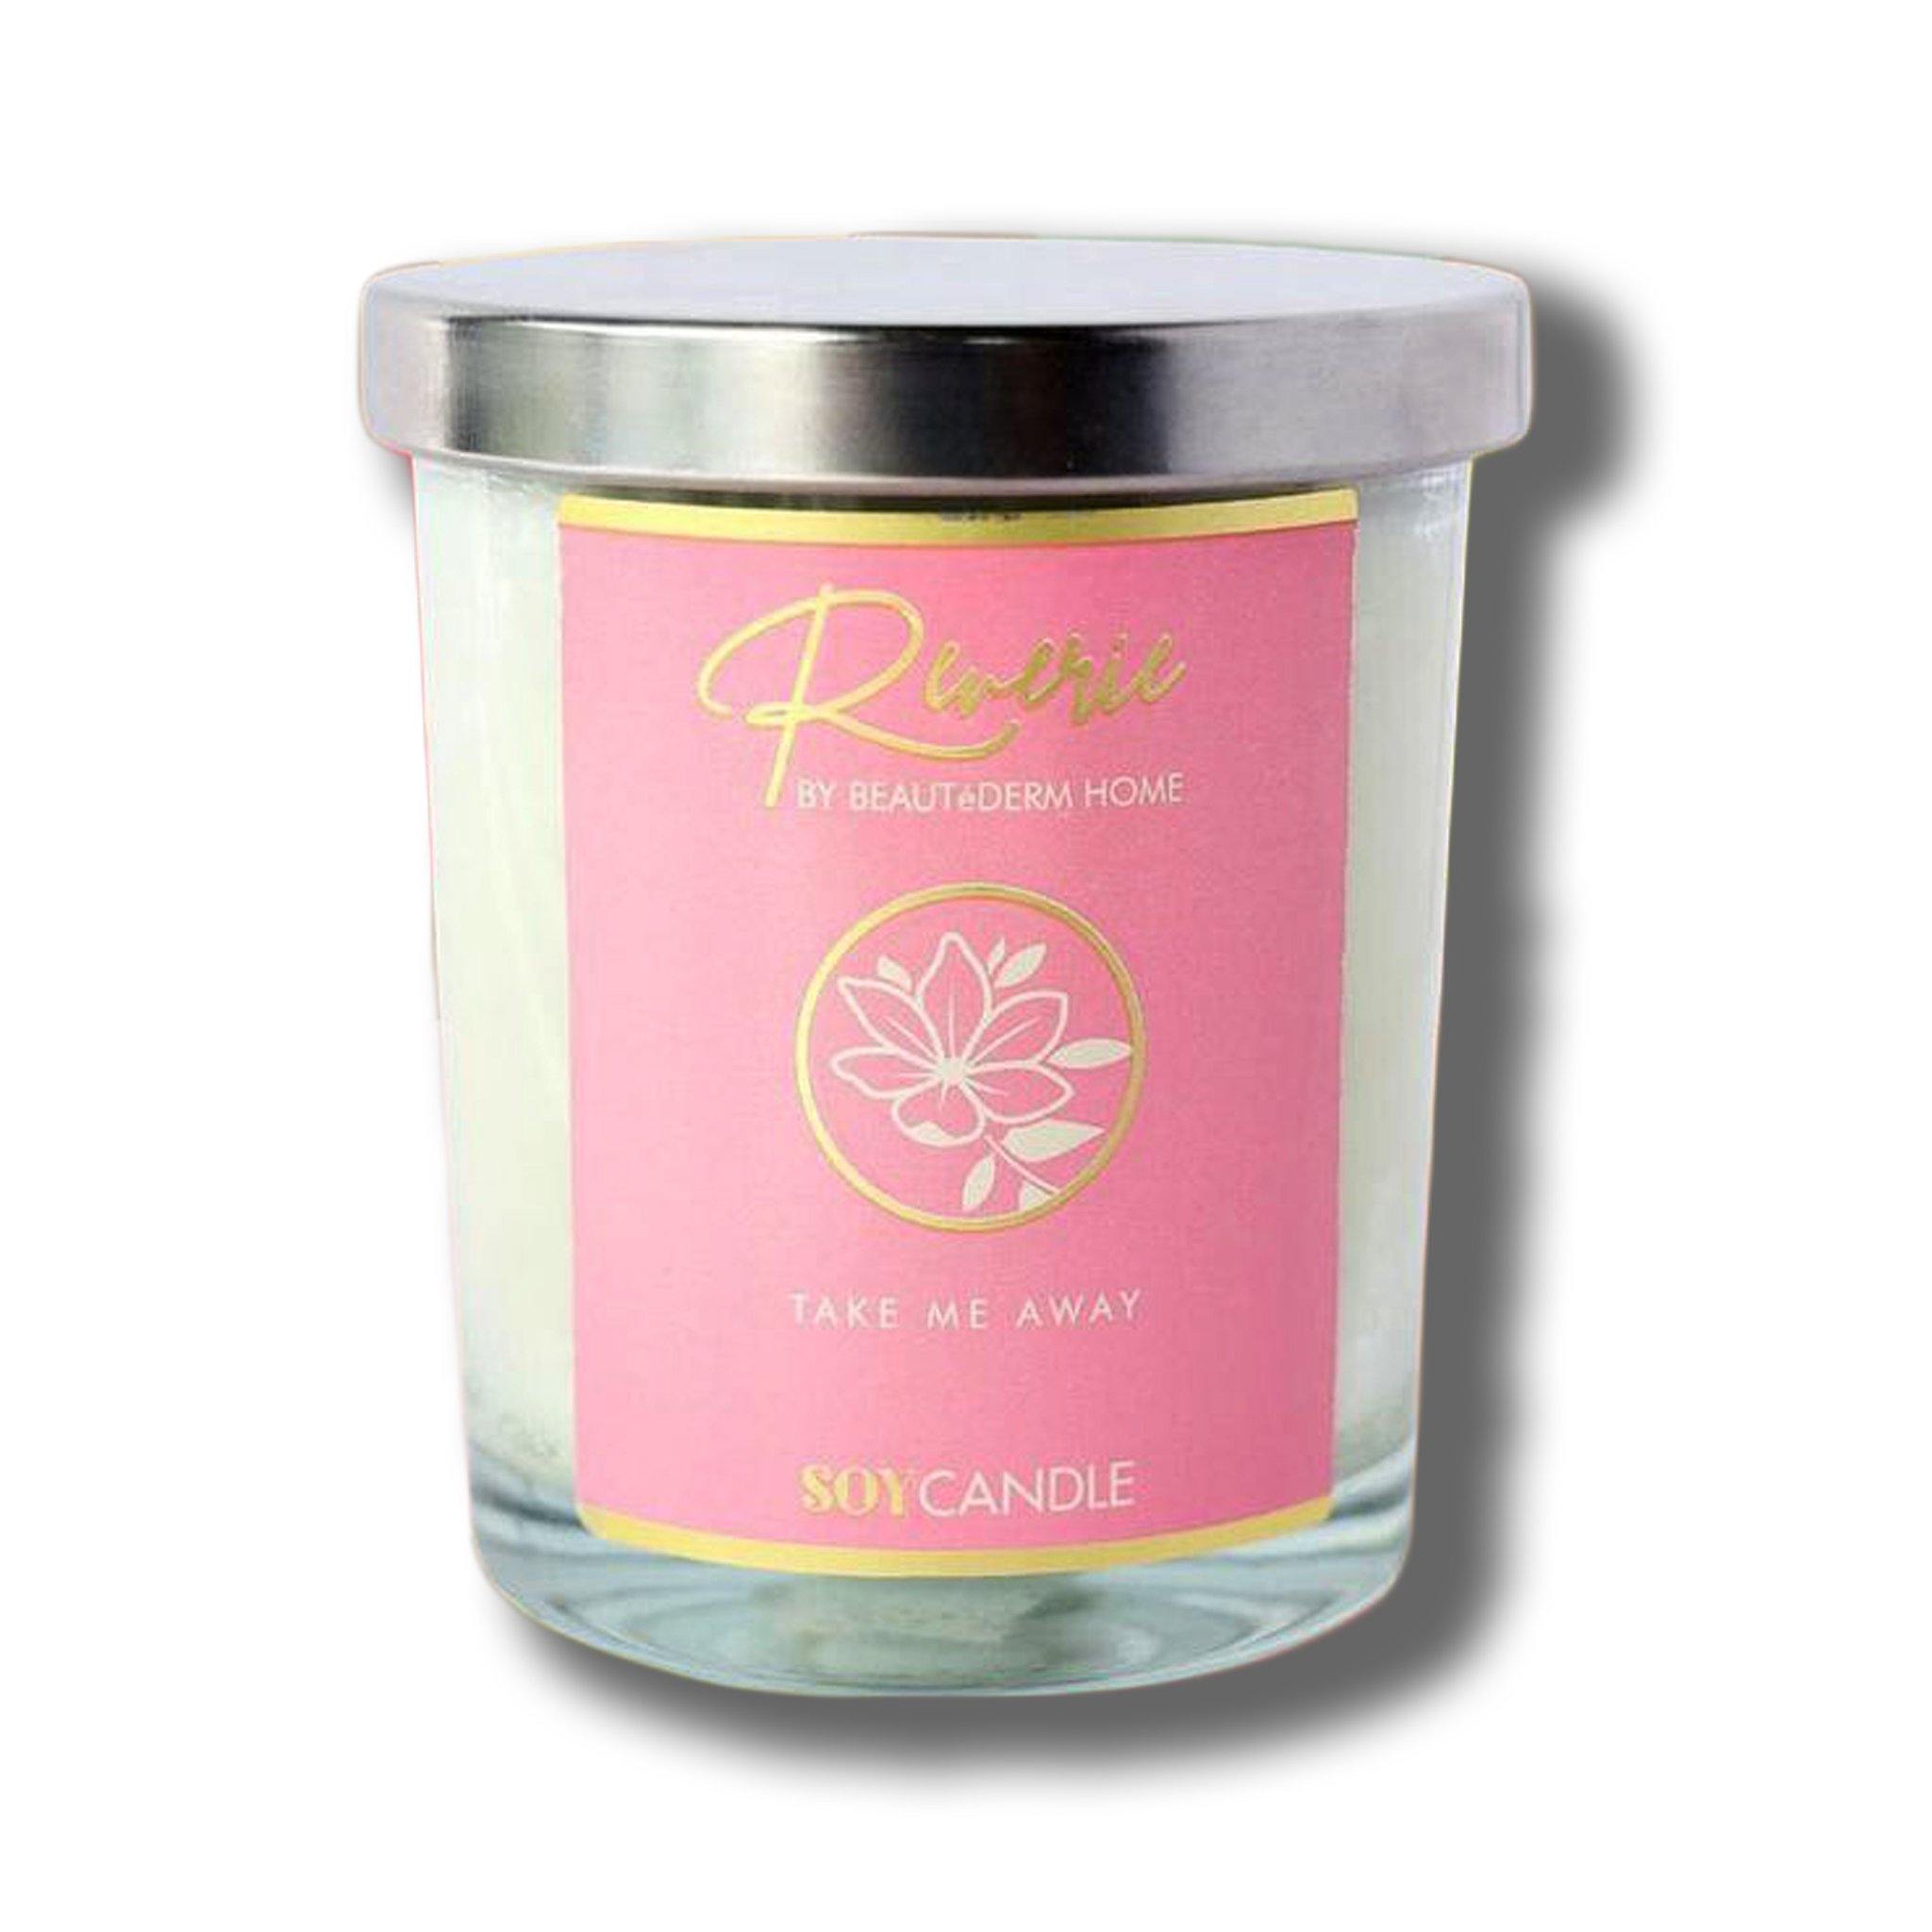 Soy Candle, Take Me Away (Cherry Blossom Scent), Reverie by Beautederm Home